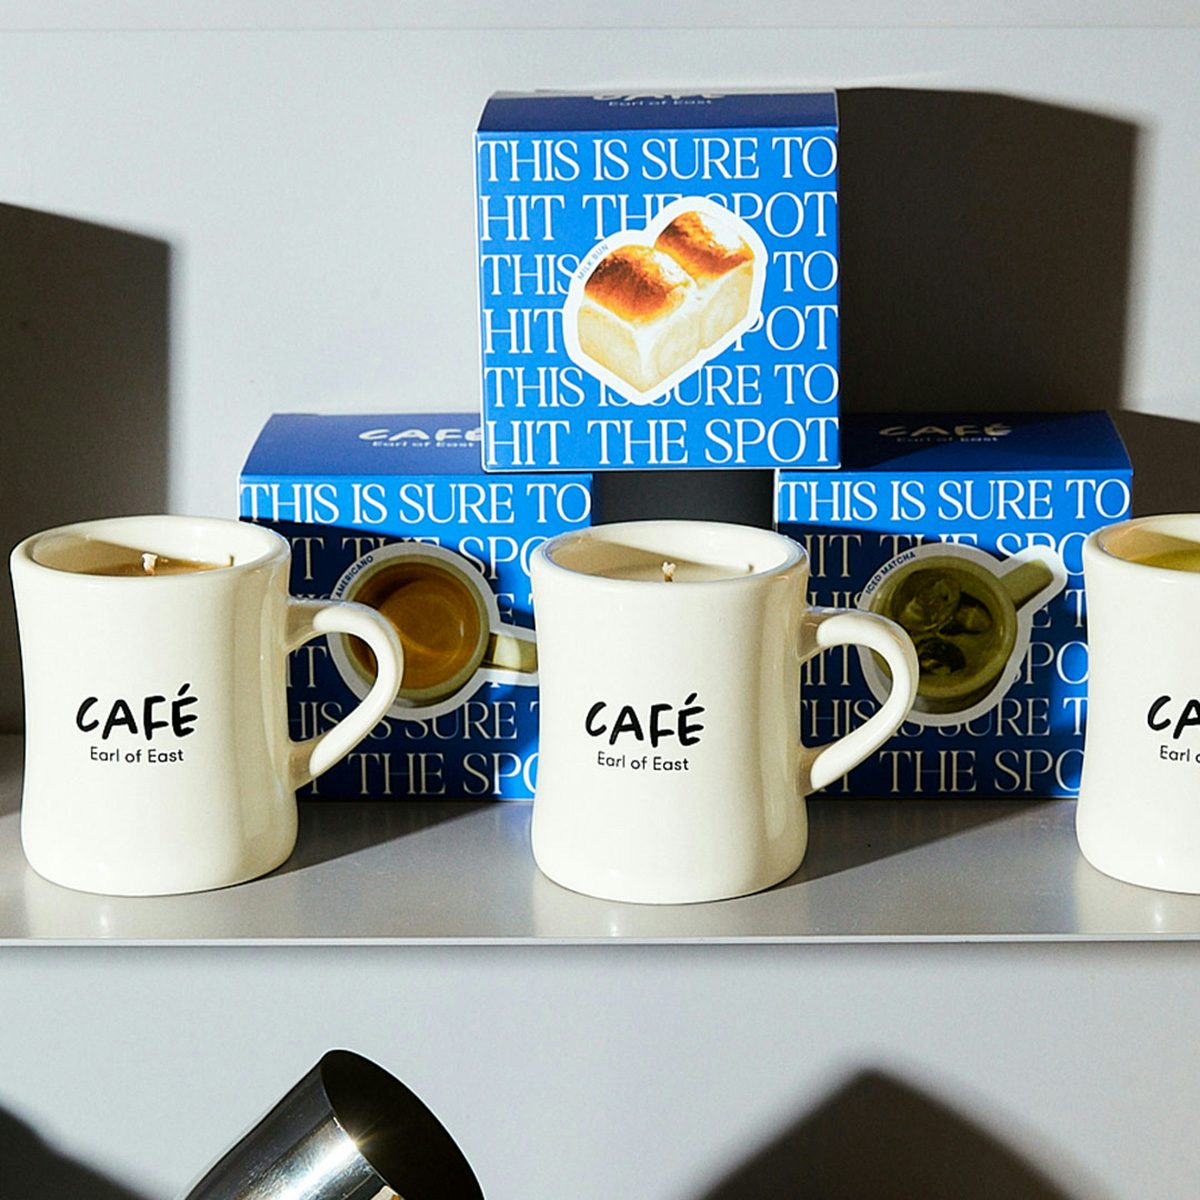 Three beige mugs labelled 'cafe' on a shelf surrounded by packaging and glassware